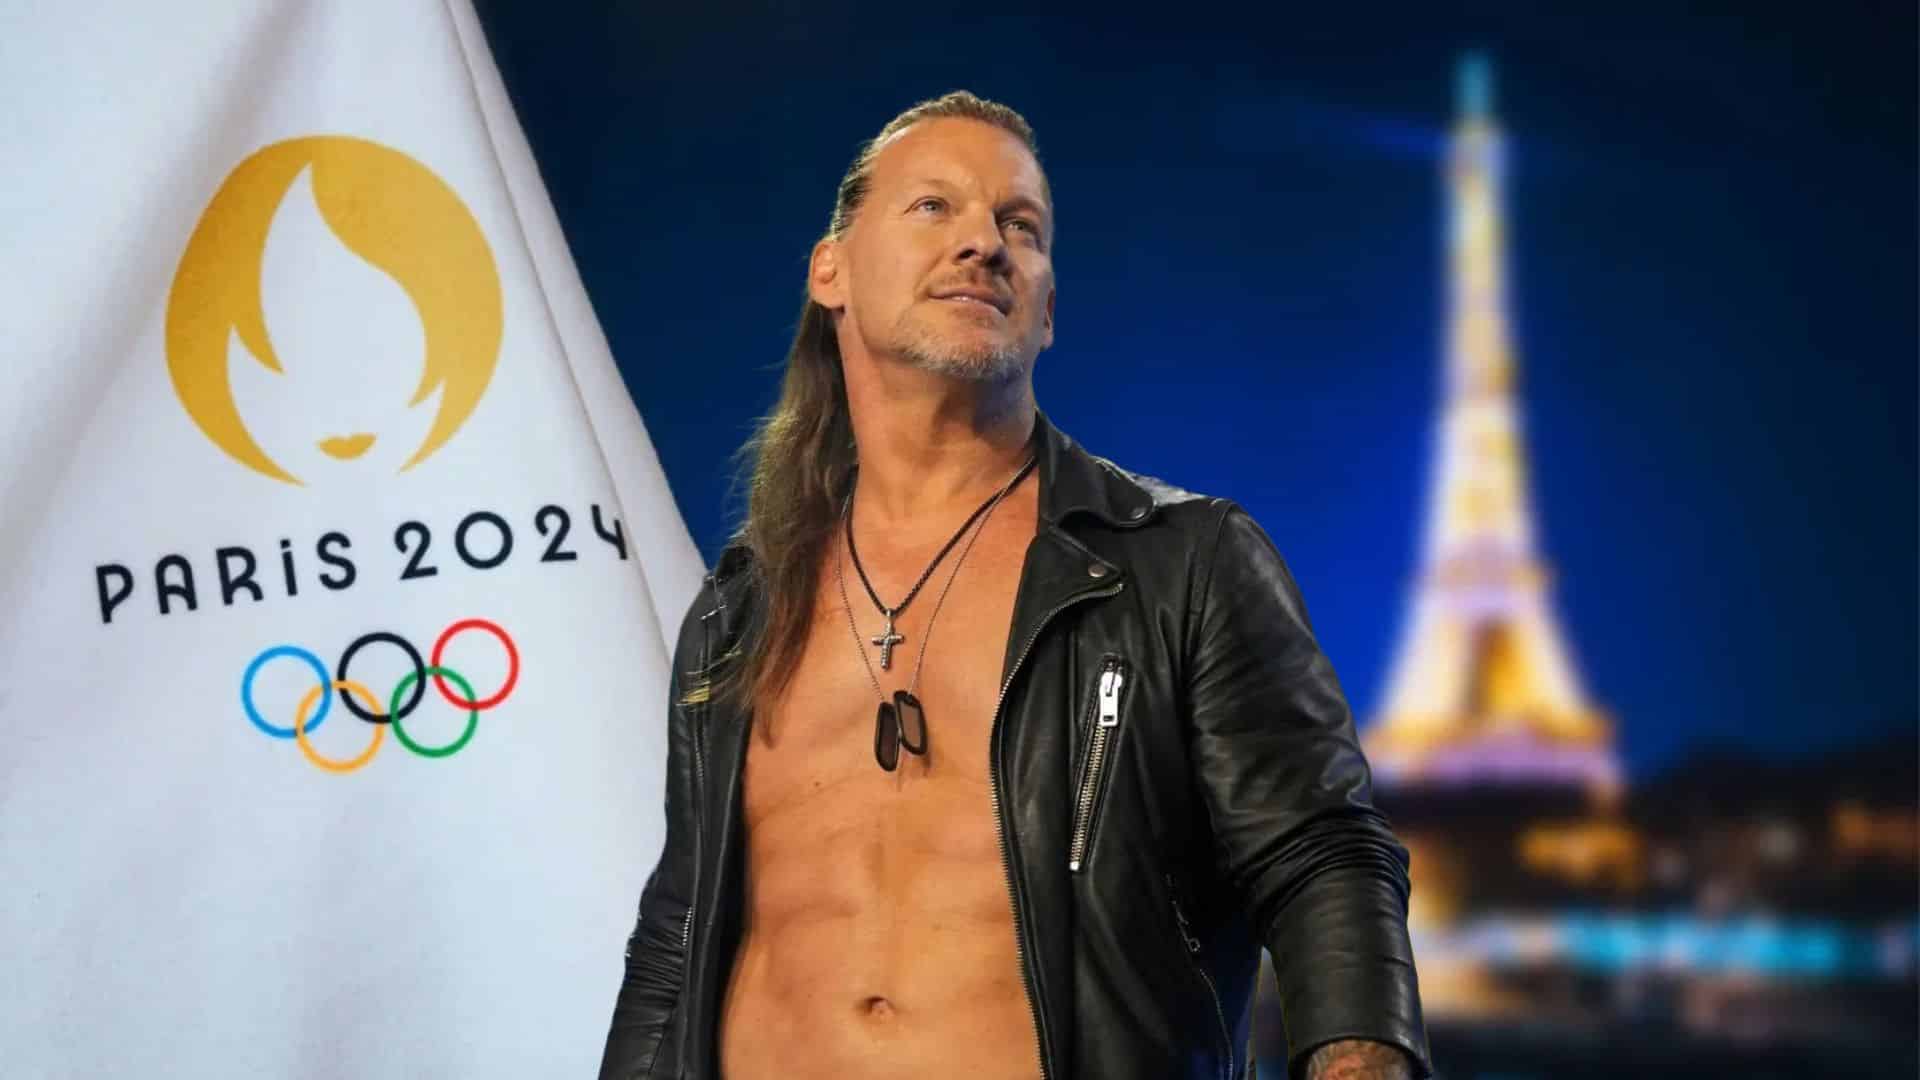 Chris Jericho suggests that professional wrestling has the potential to effortlessly become a part of the Olympic games.